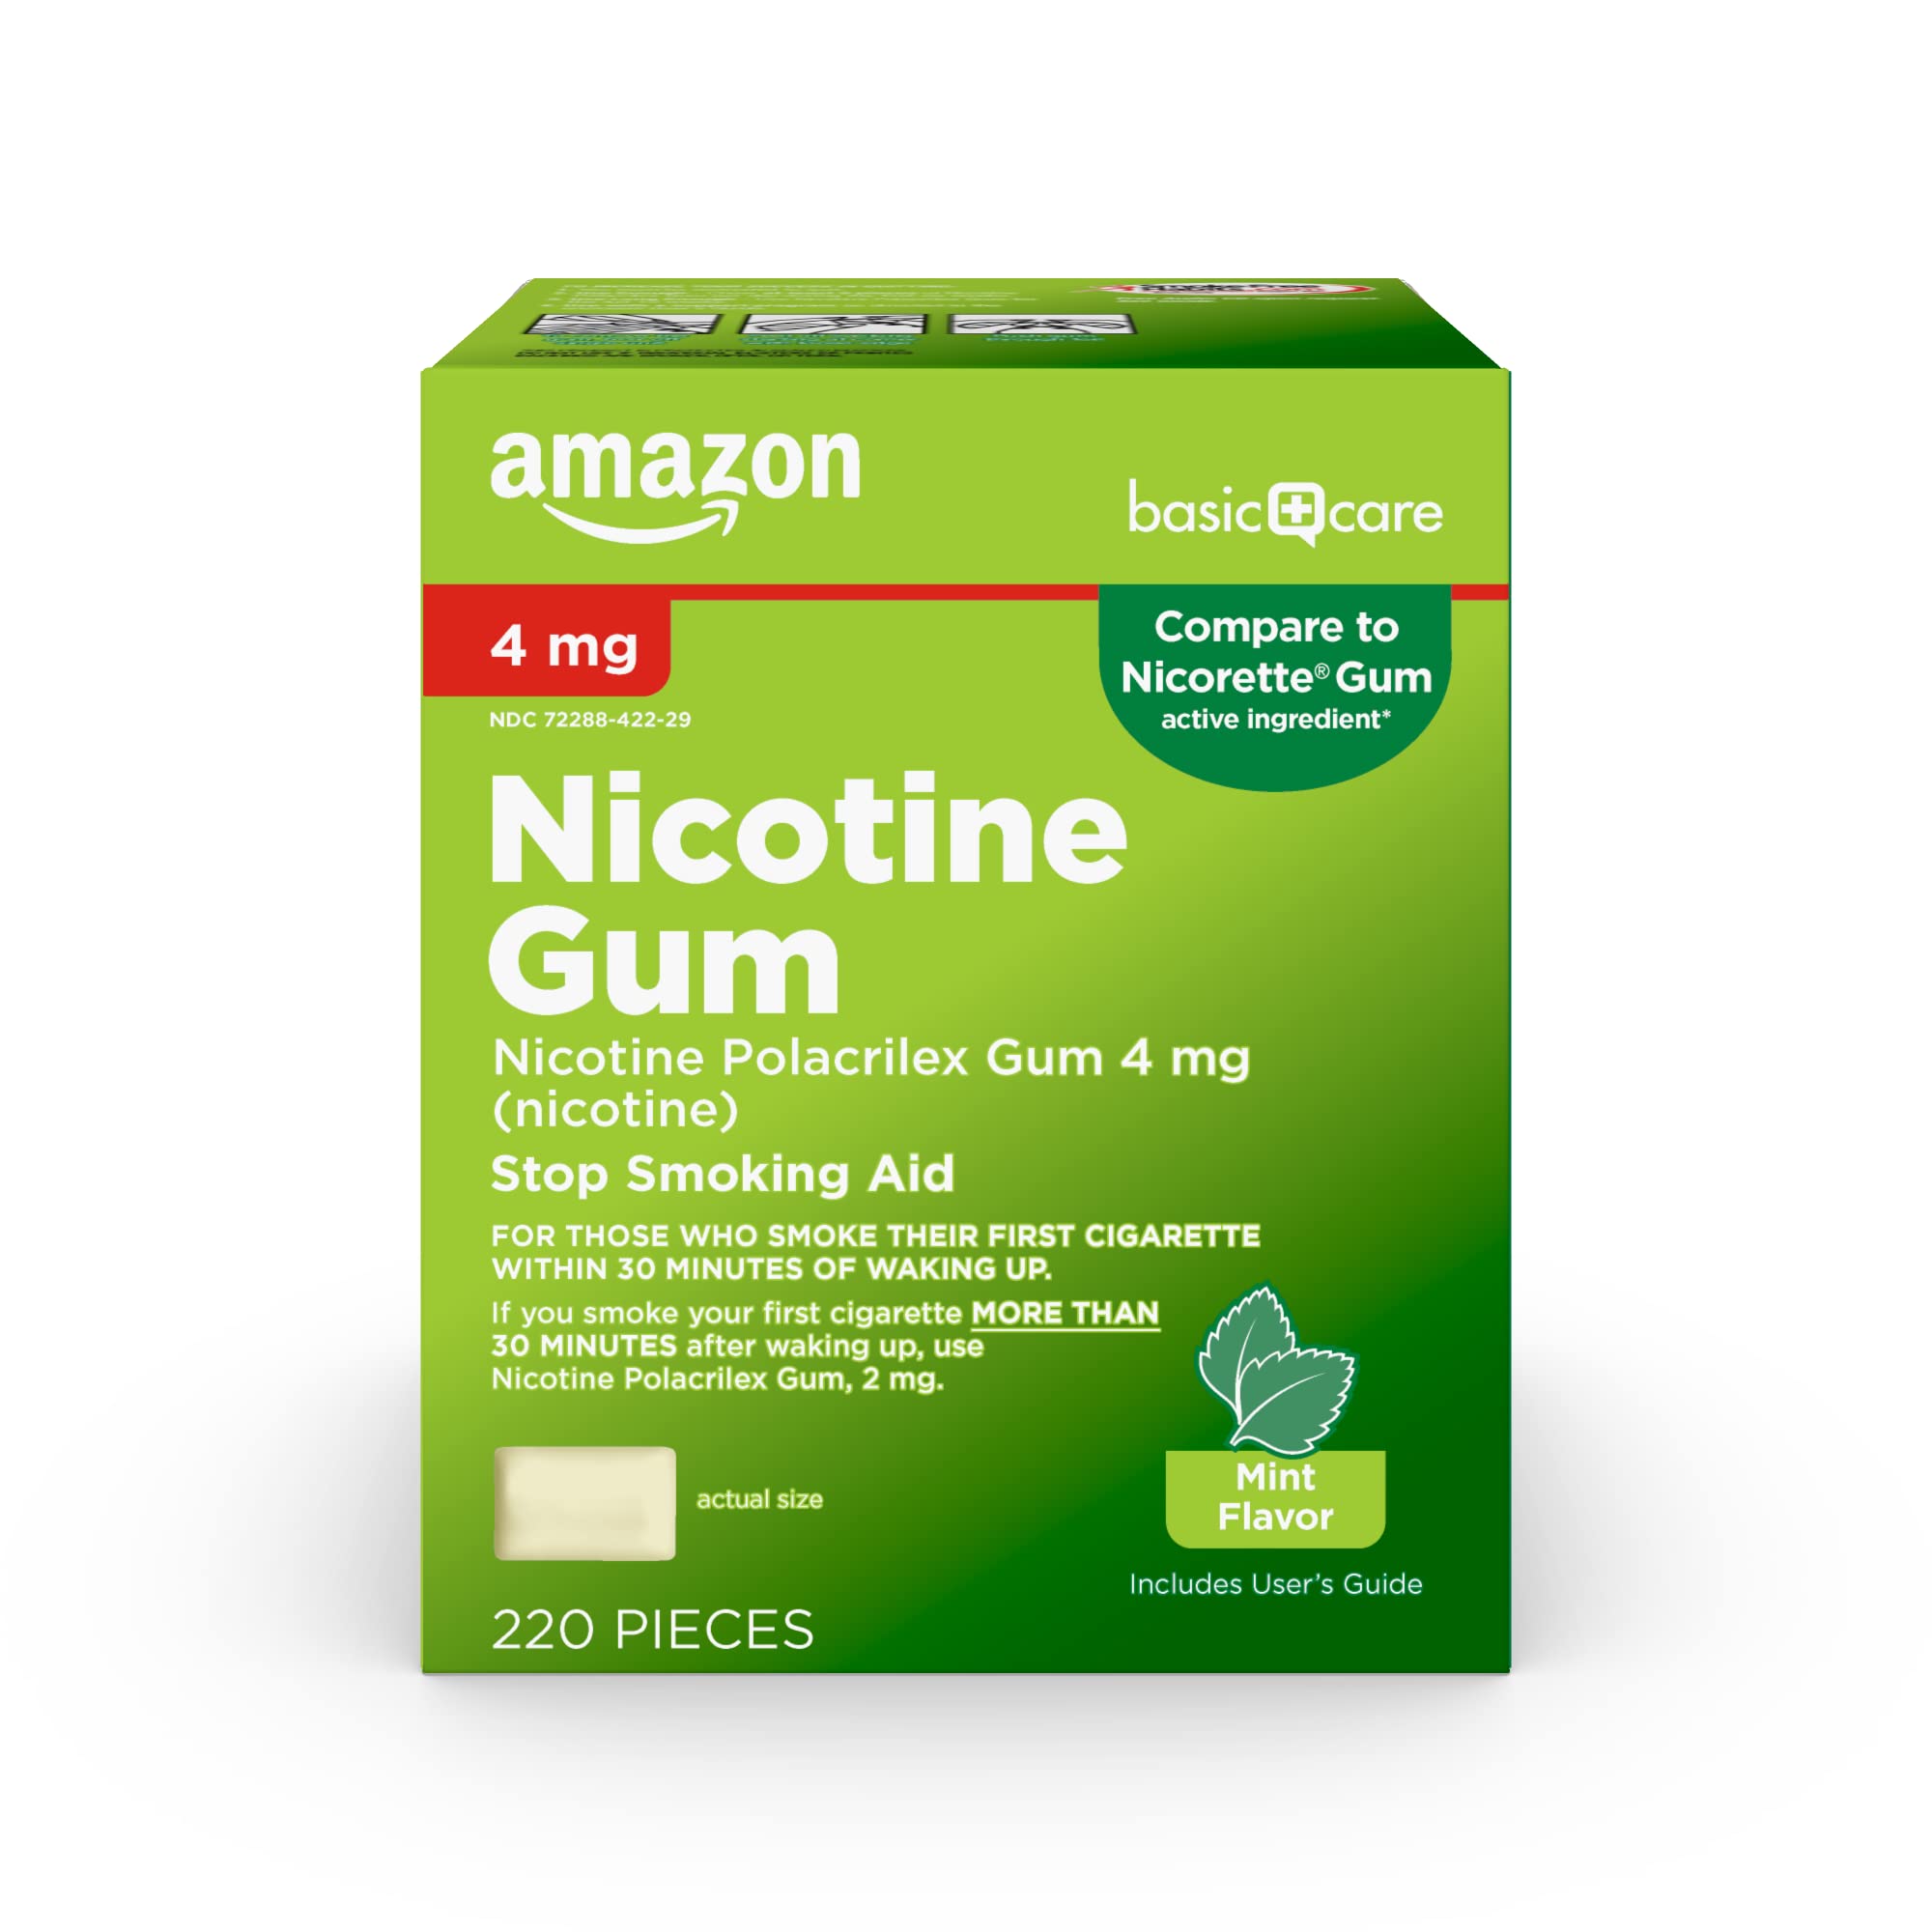 Amazon Basic Care Uncoated Nicotine Polacrilex Gum 4 mg, Mint Flavor, Stop Smoking Aid, 220 Count